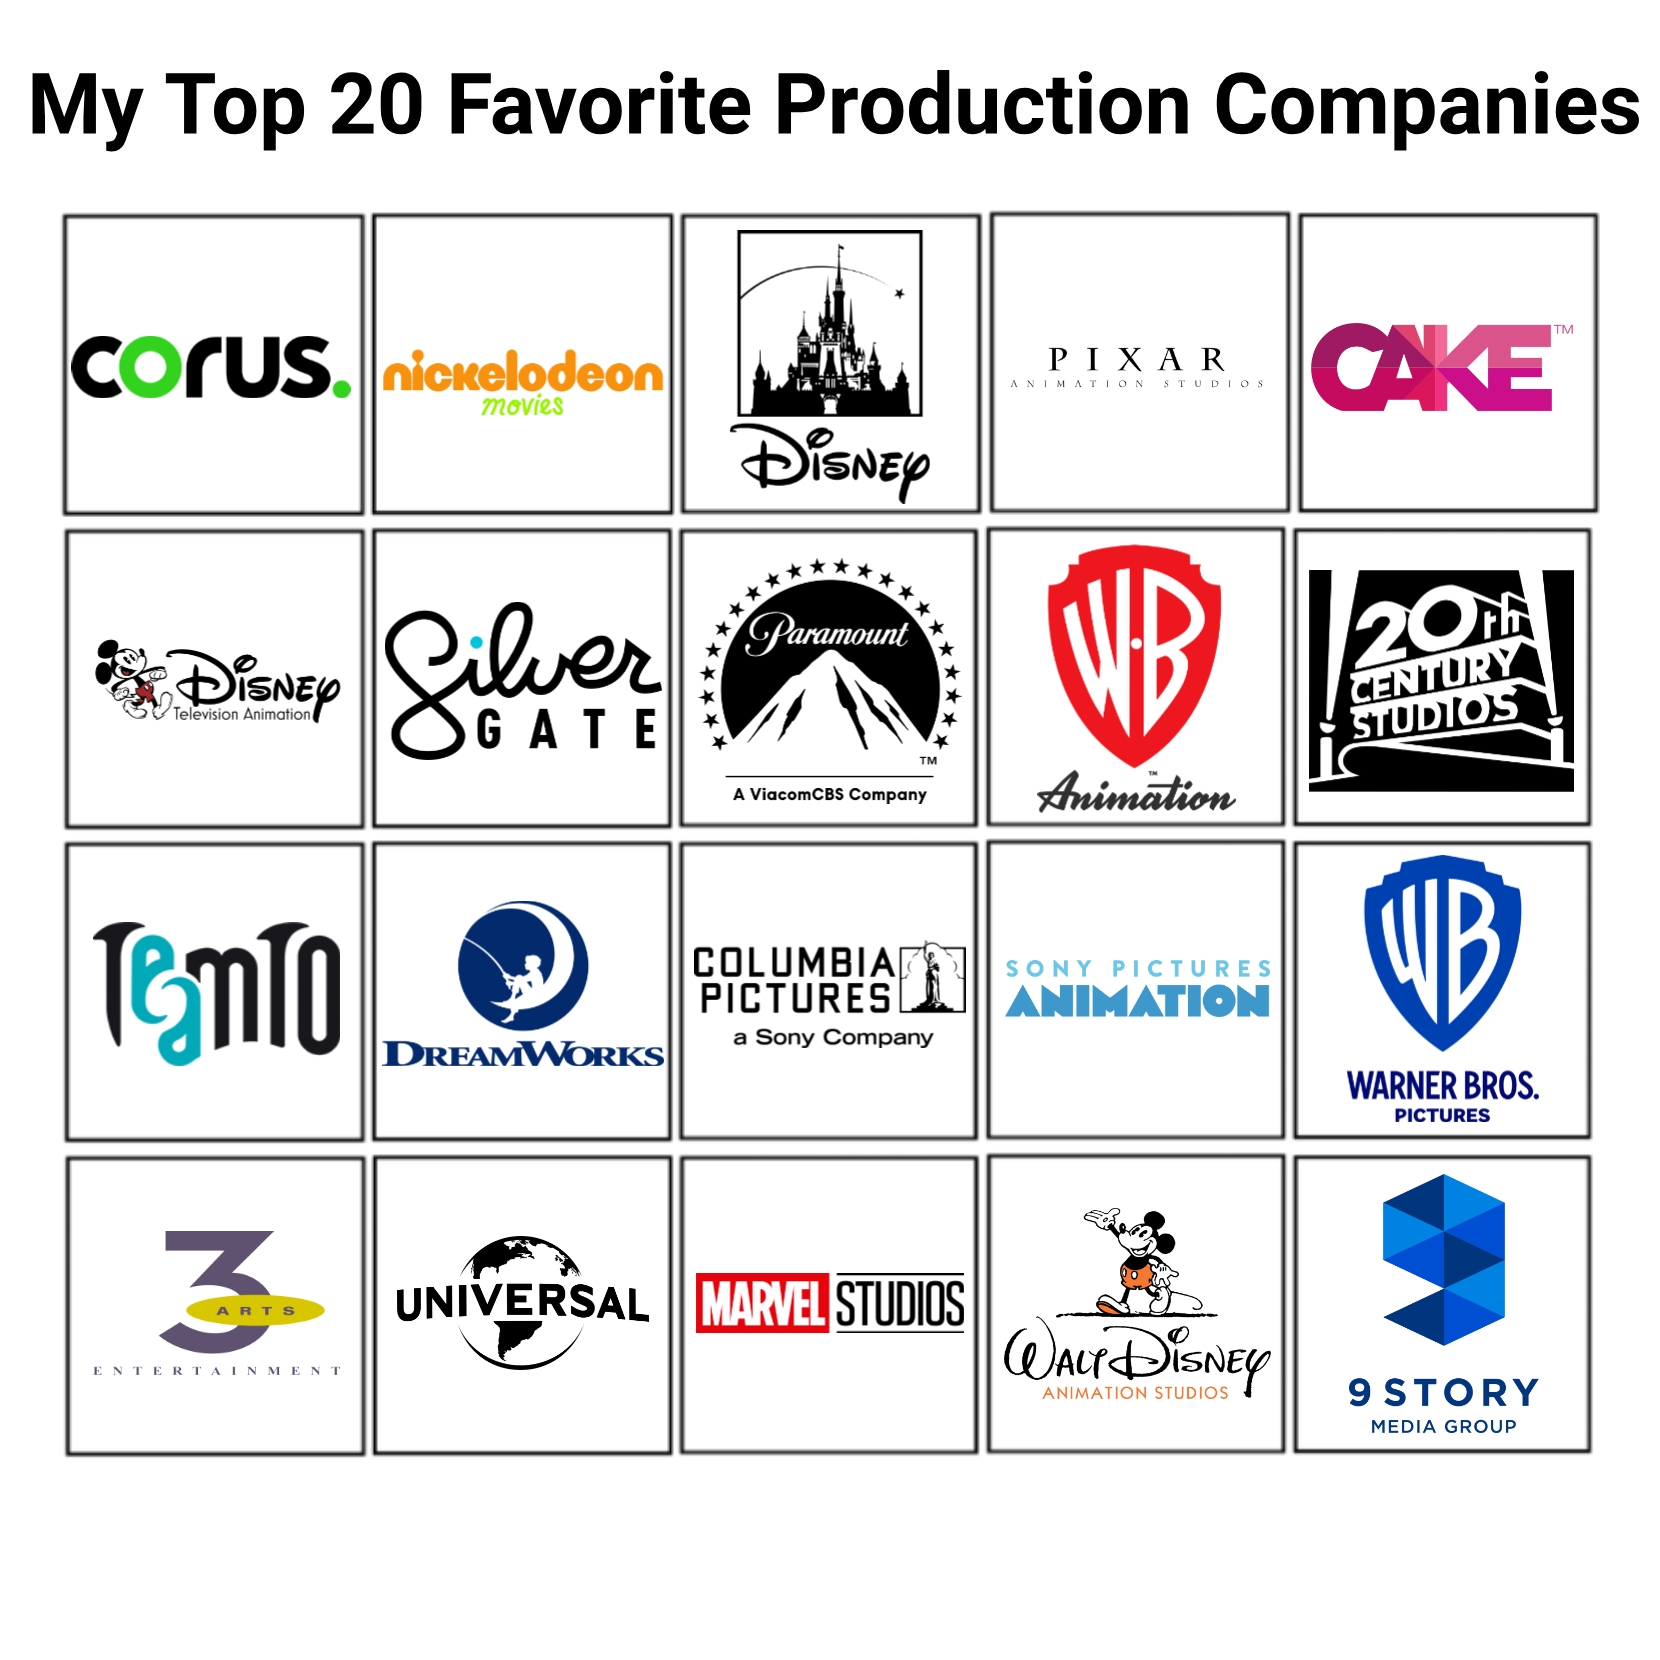 My Top 20 Production Companies (Part 3) by Ptbf2002 on DeviantArt